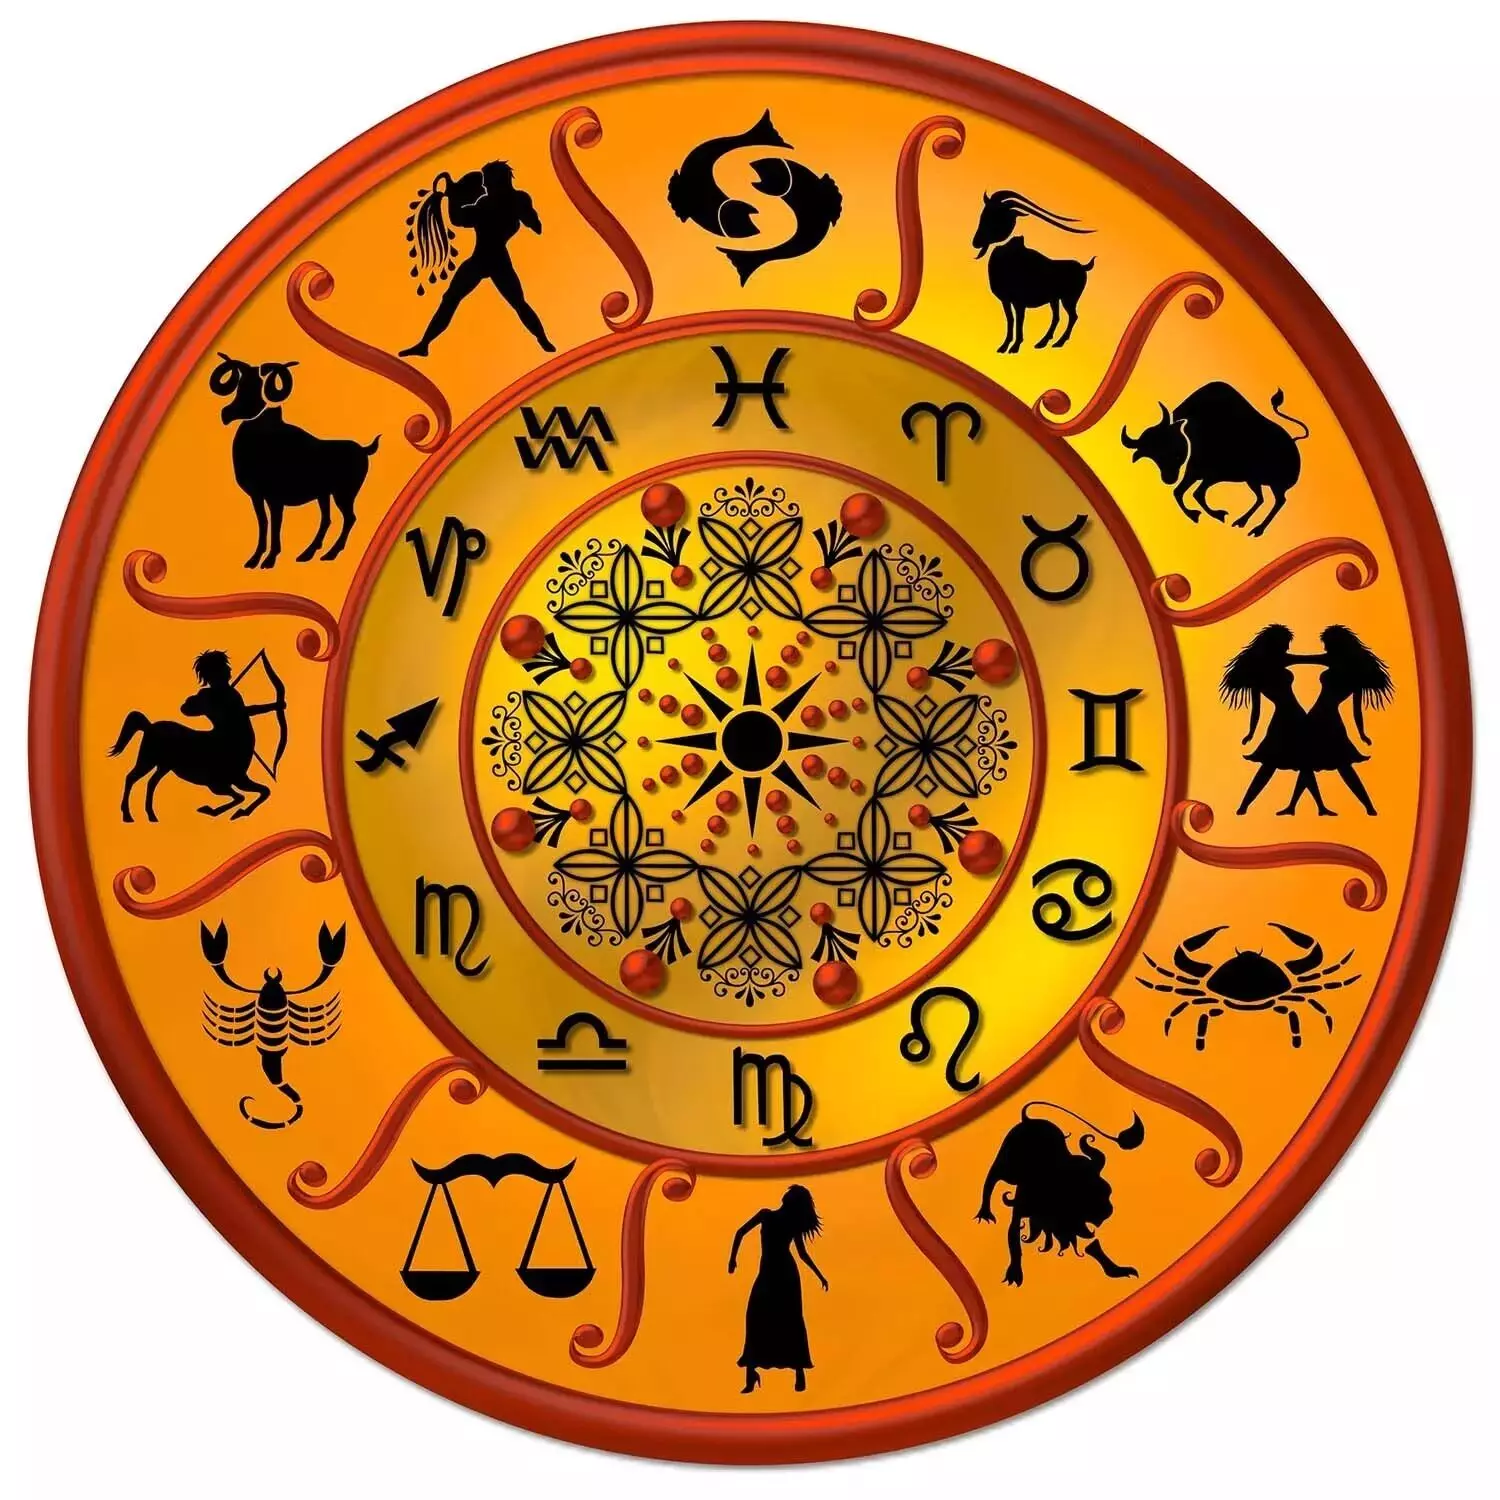 07 September  – Know your todays horoscope